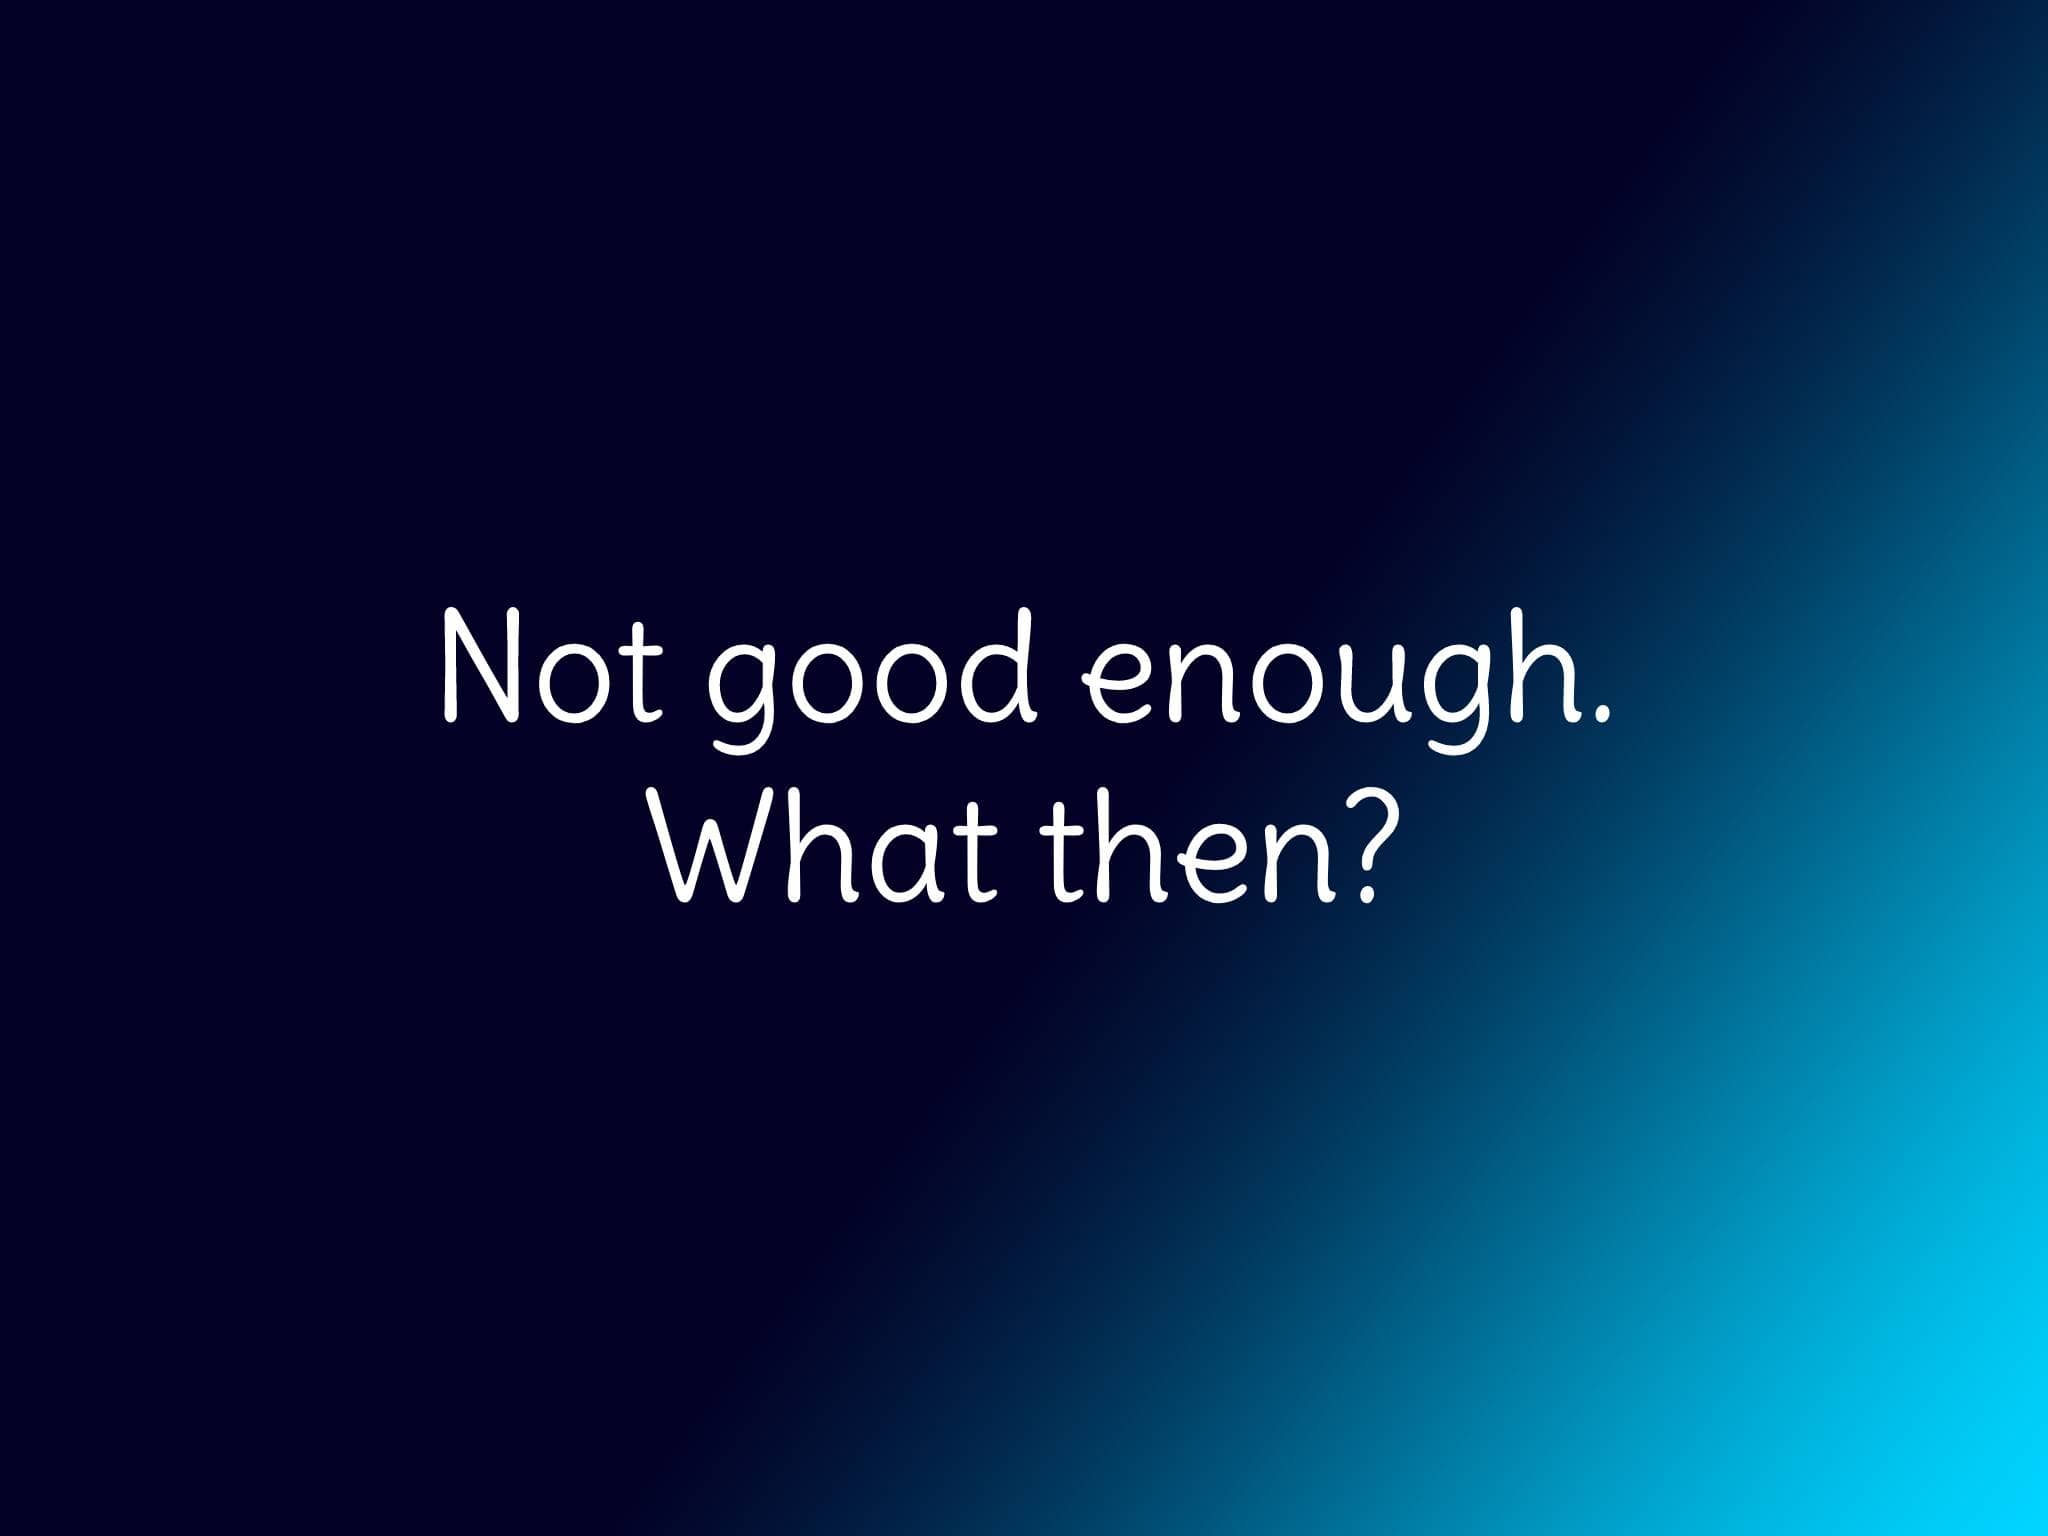 An image with gray background color, with the bright-colored text, "Not good enough. What then?"